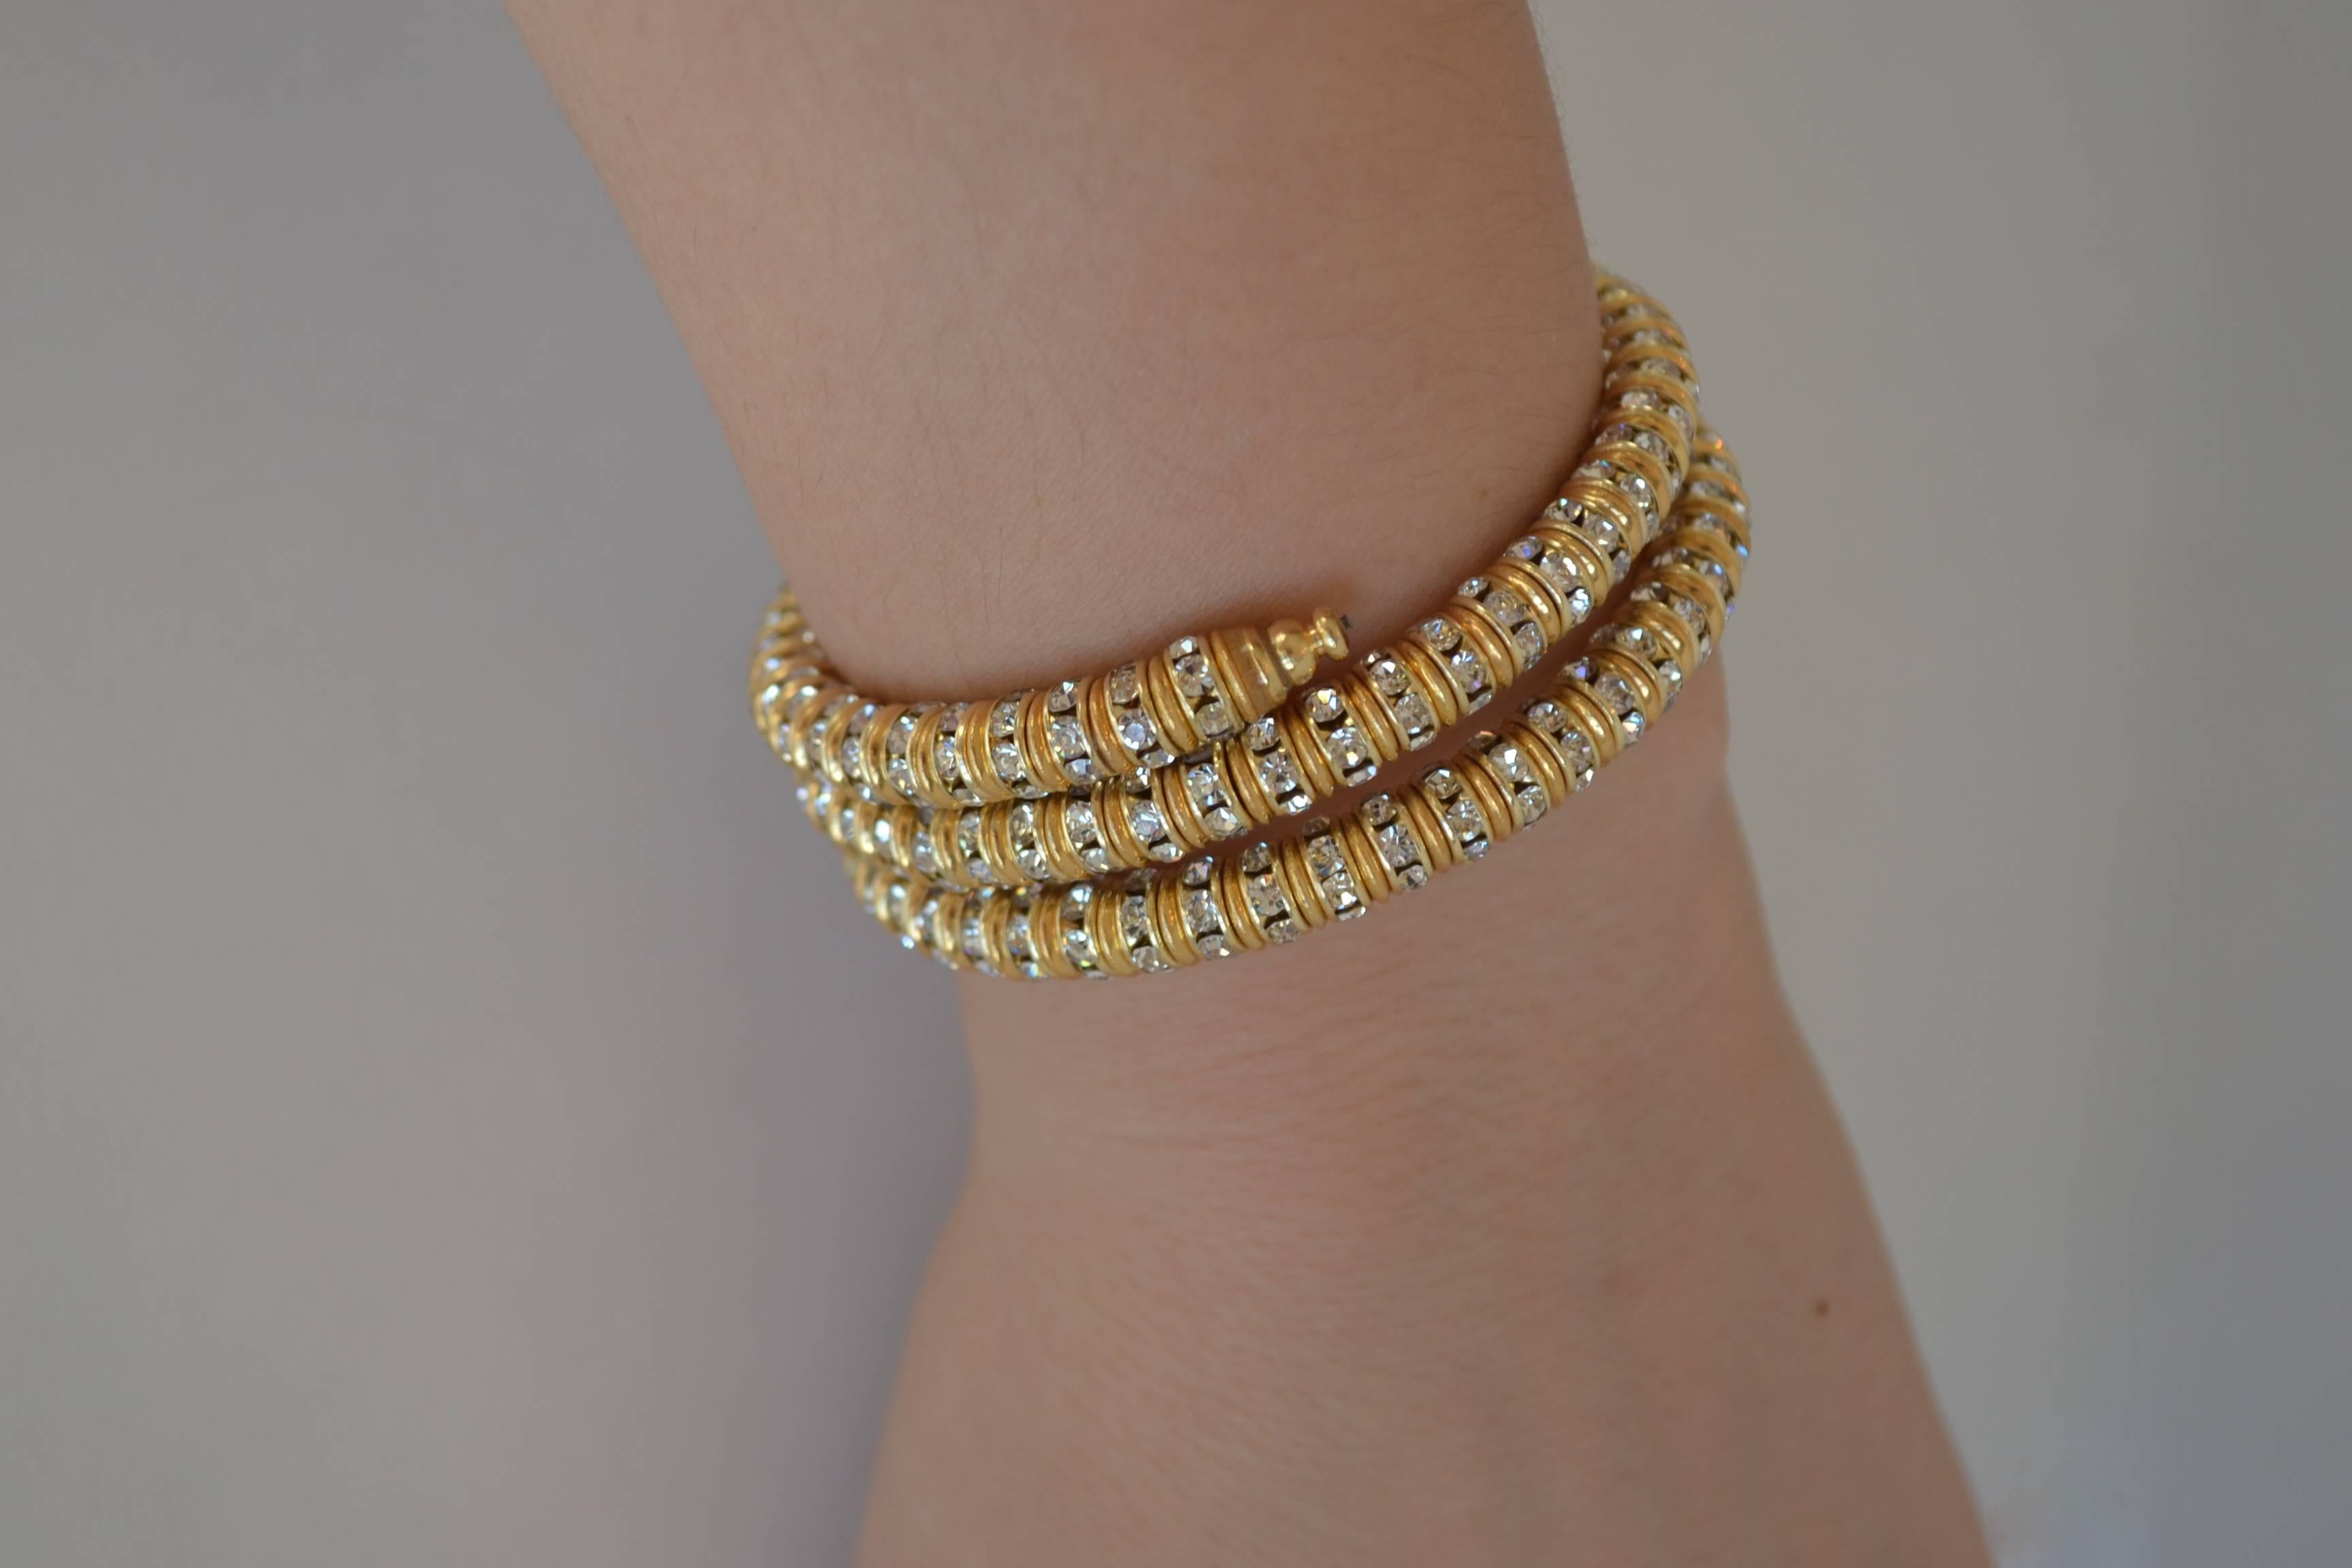 Memory wire wrap bracelet with clear crystal and gold rondelles from Francoise Montague. Fits most wrists both large and small and is easy to take on and off.